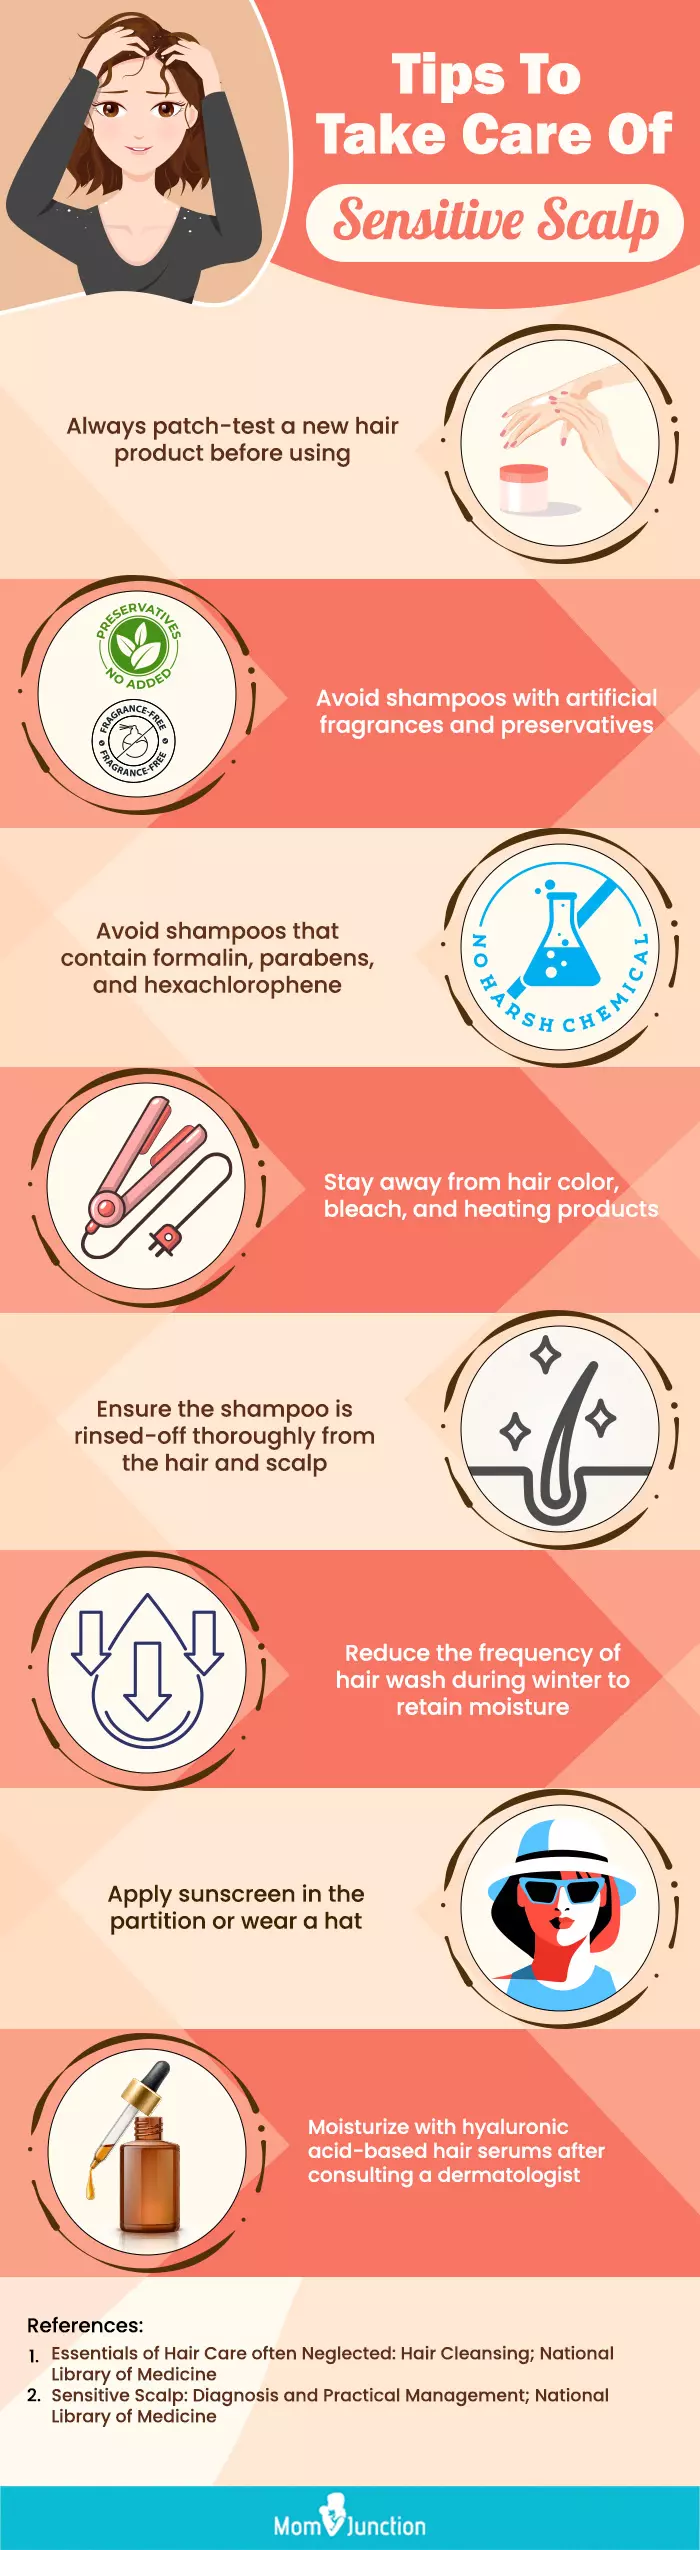 Tips To Take Care Of Sensitive Scalp